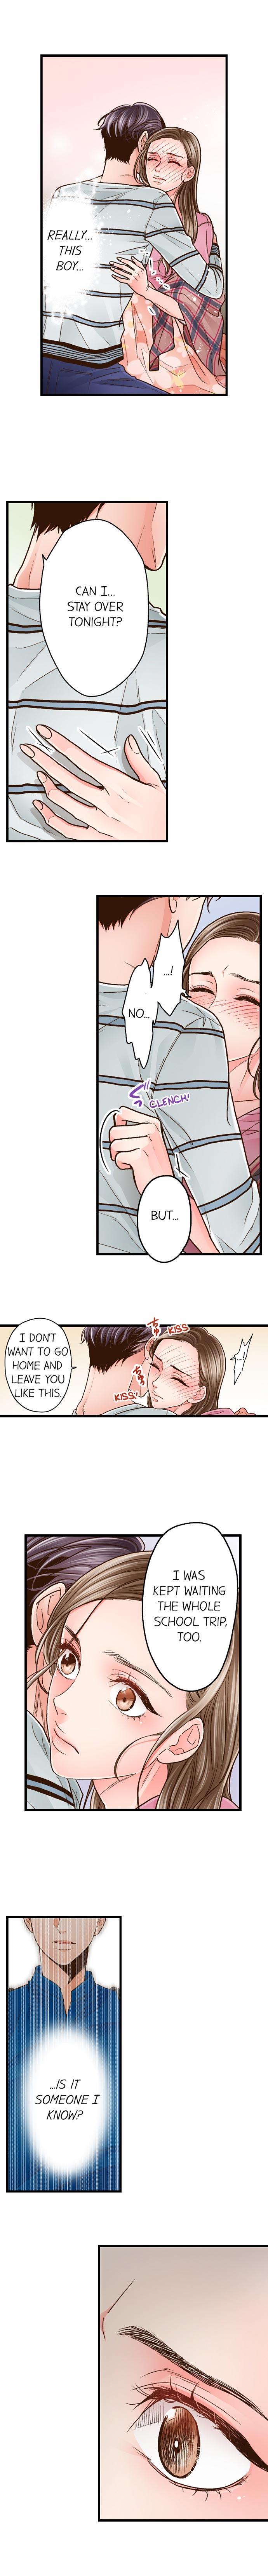 Yanagihara Is a Sex Addict. - Chapter 51 Page 3